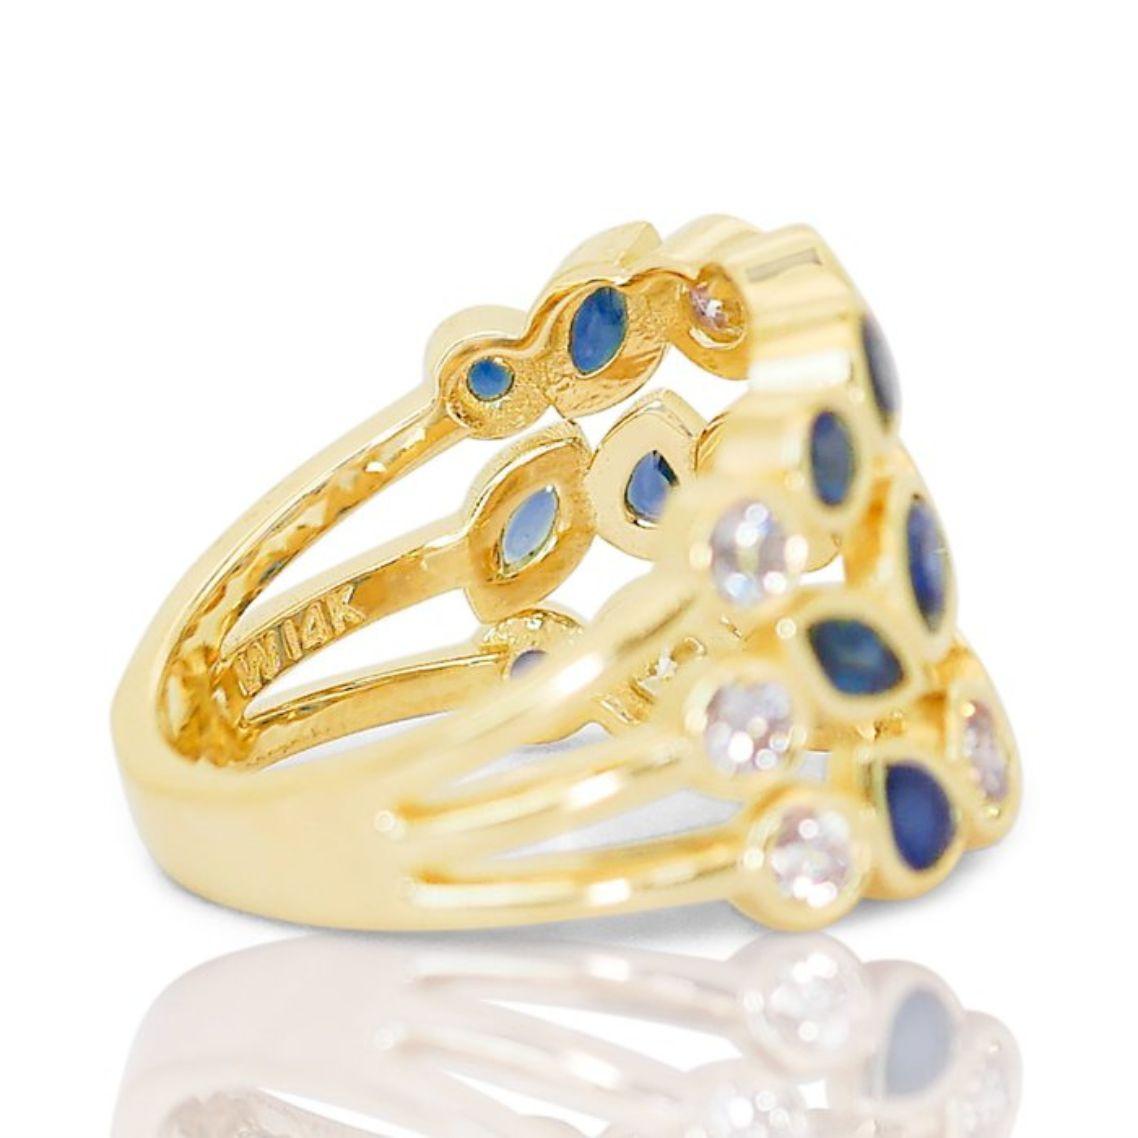 Captivating 3.37ct Diamond and Sapphire Ring in 14K Yellow Gold 1